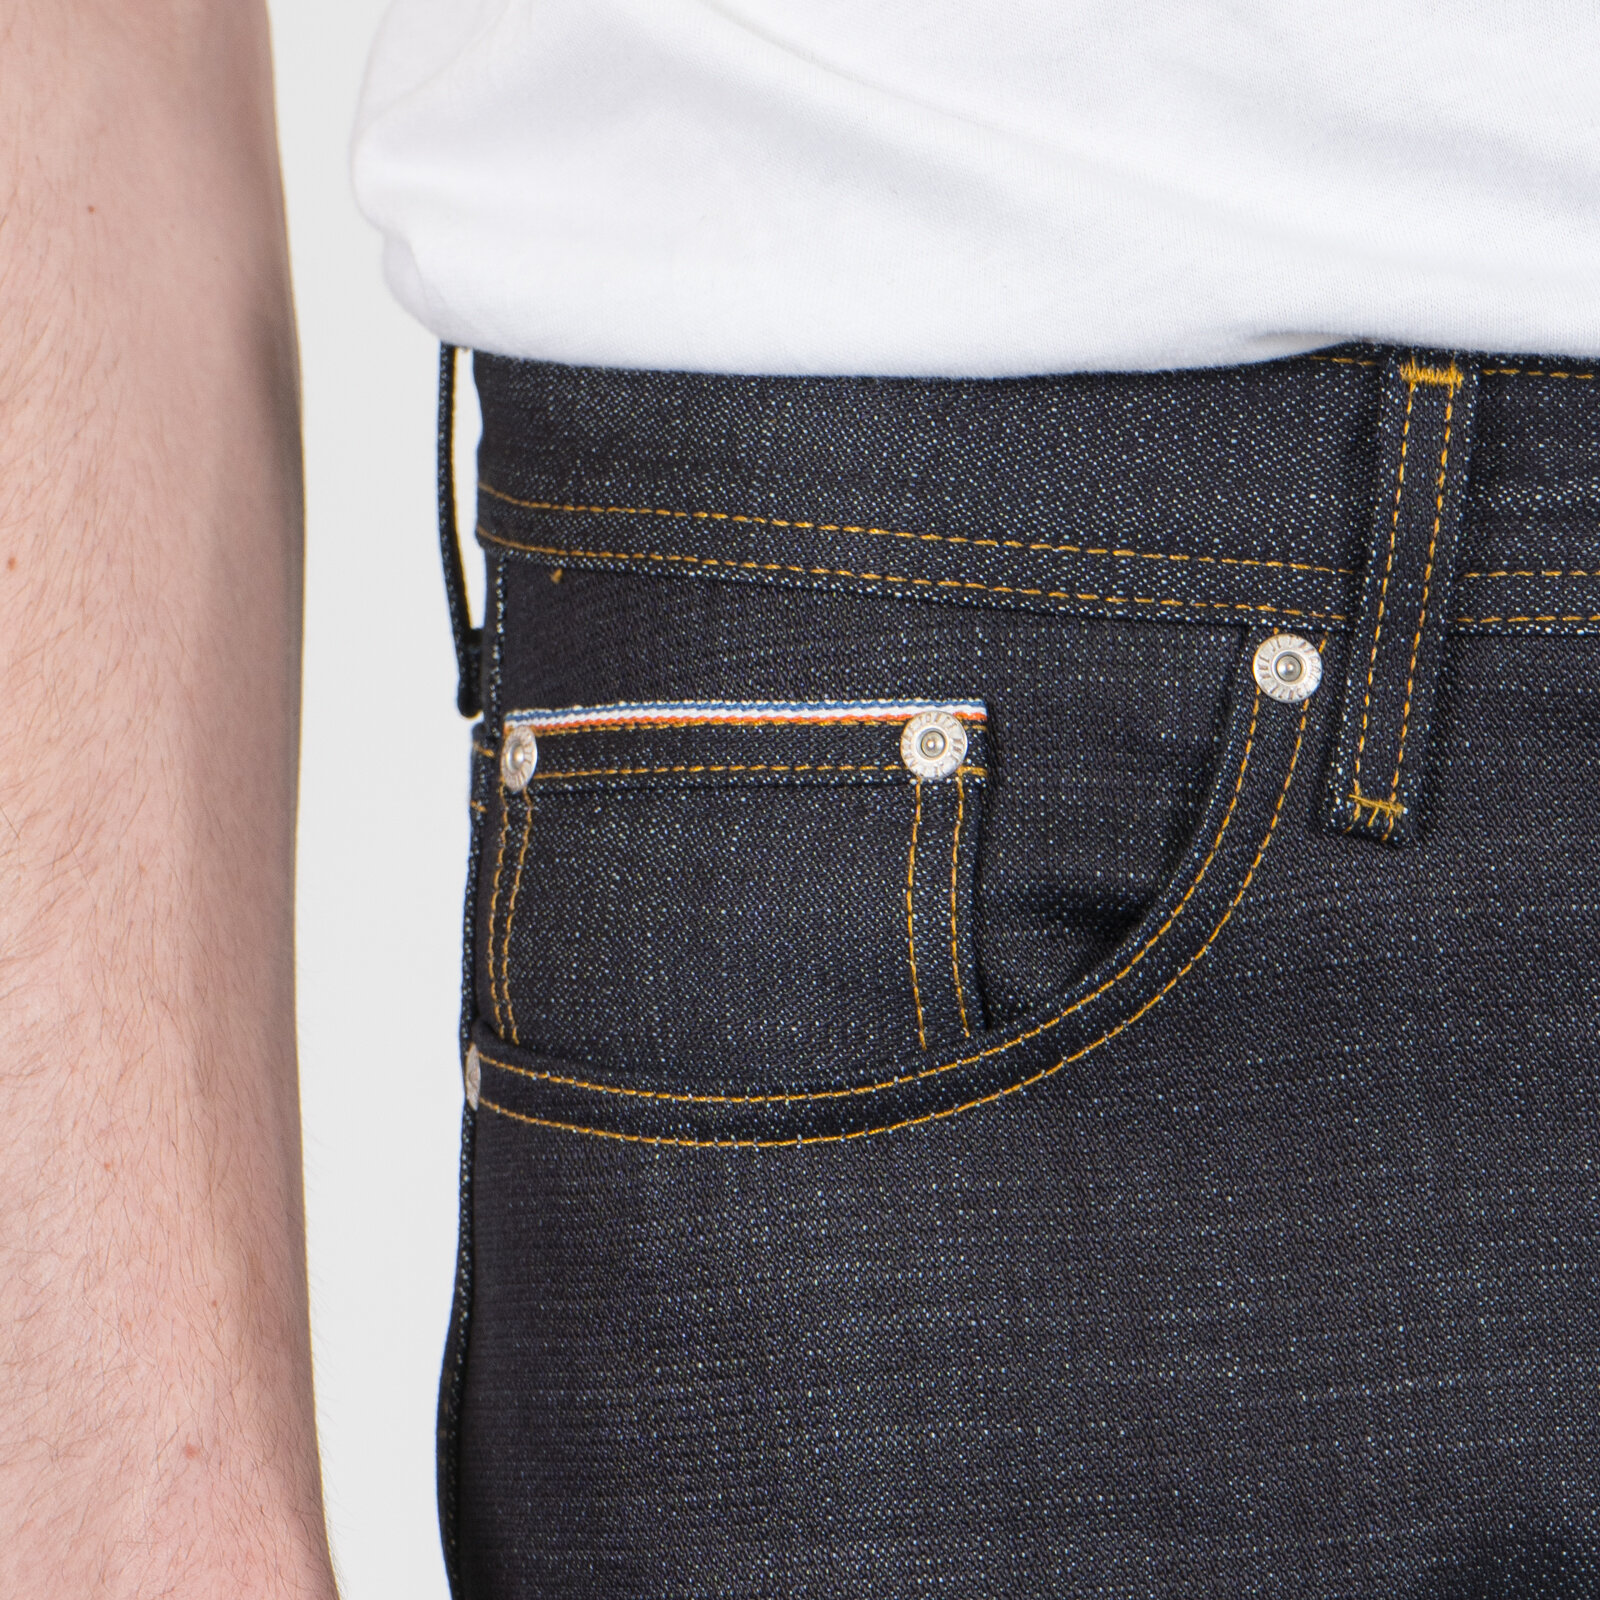  Empire State Selvedge jeans - coin pocket 